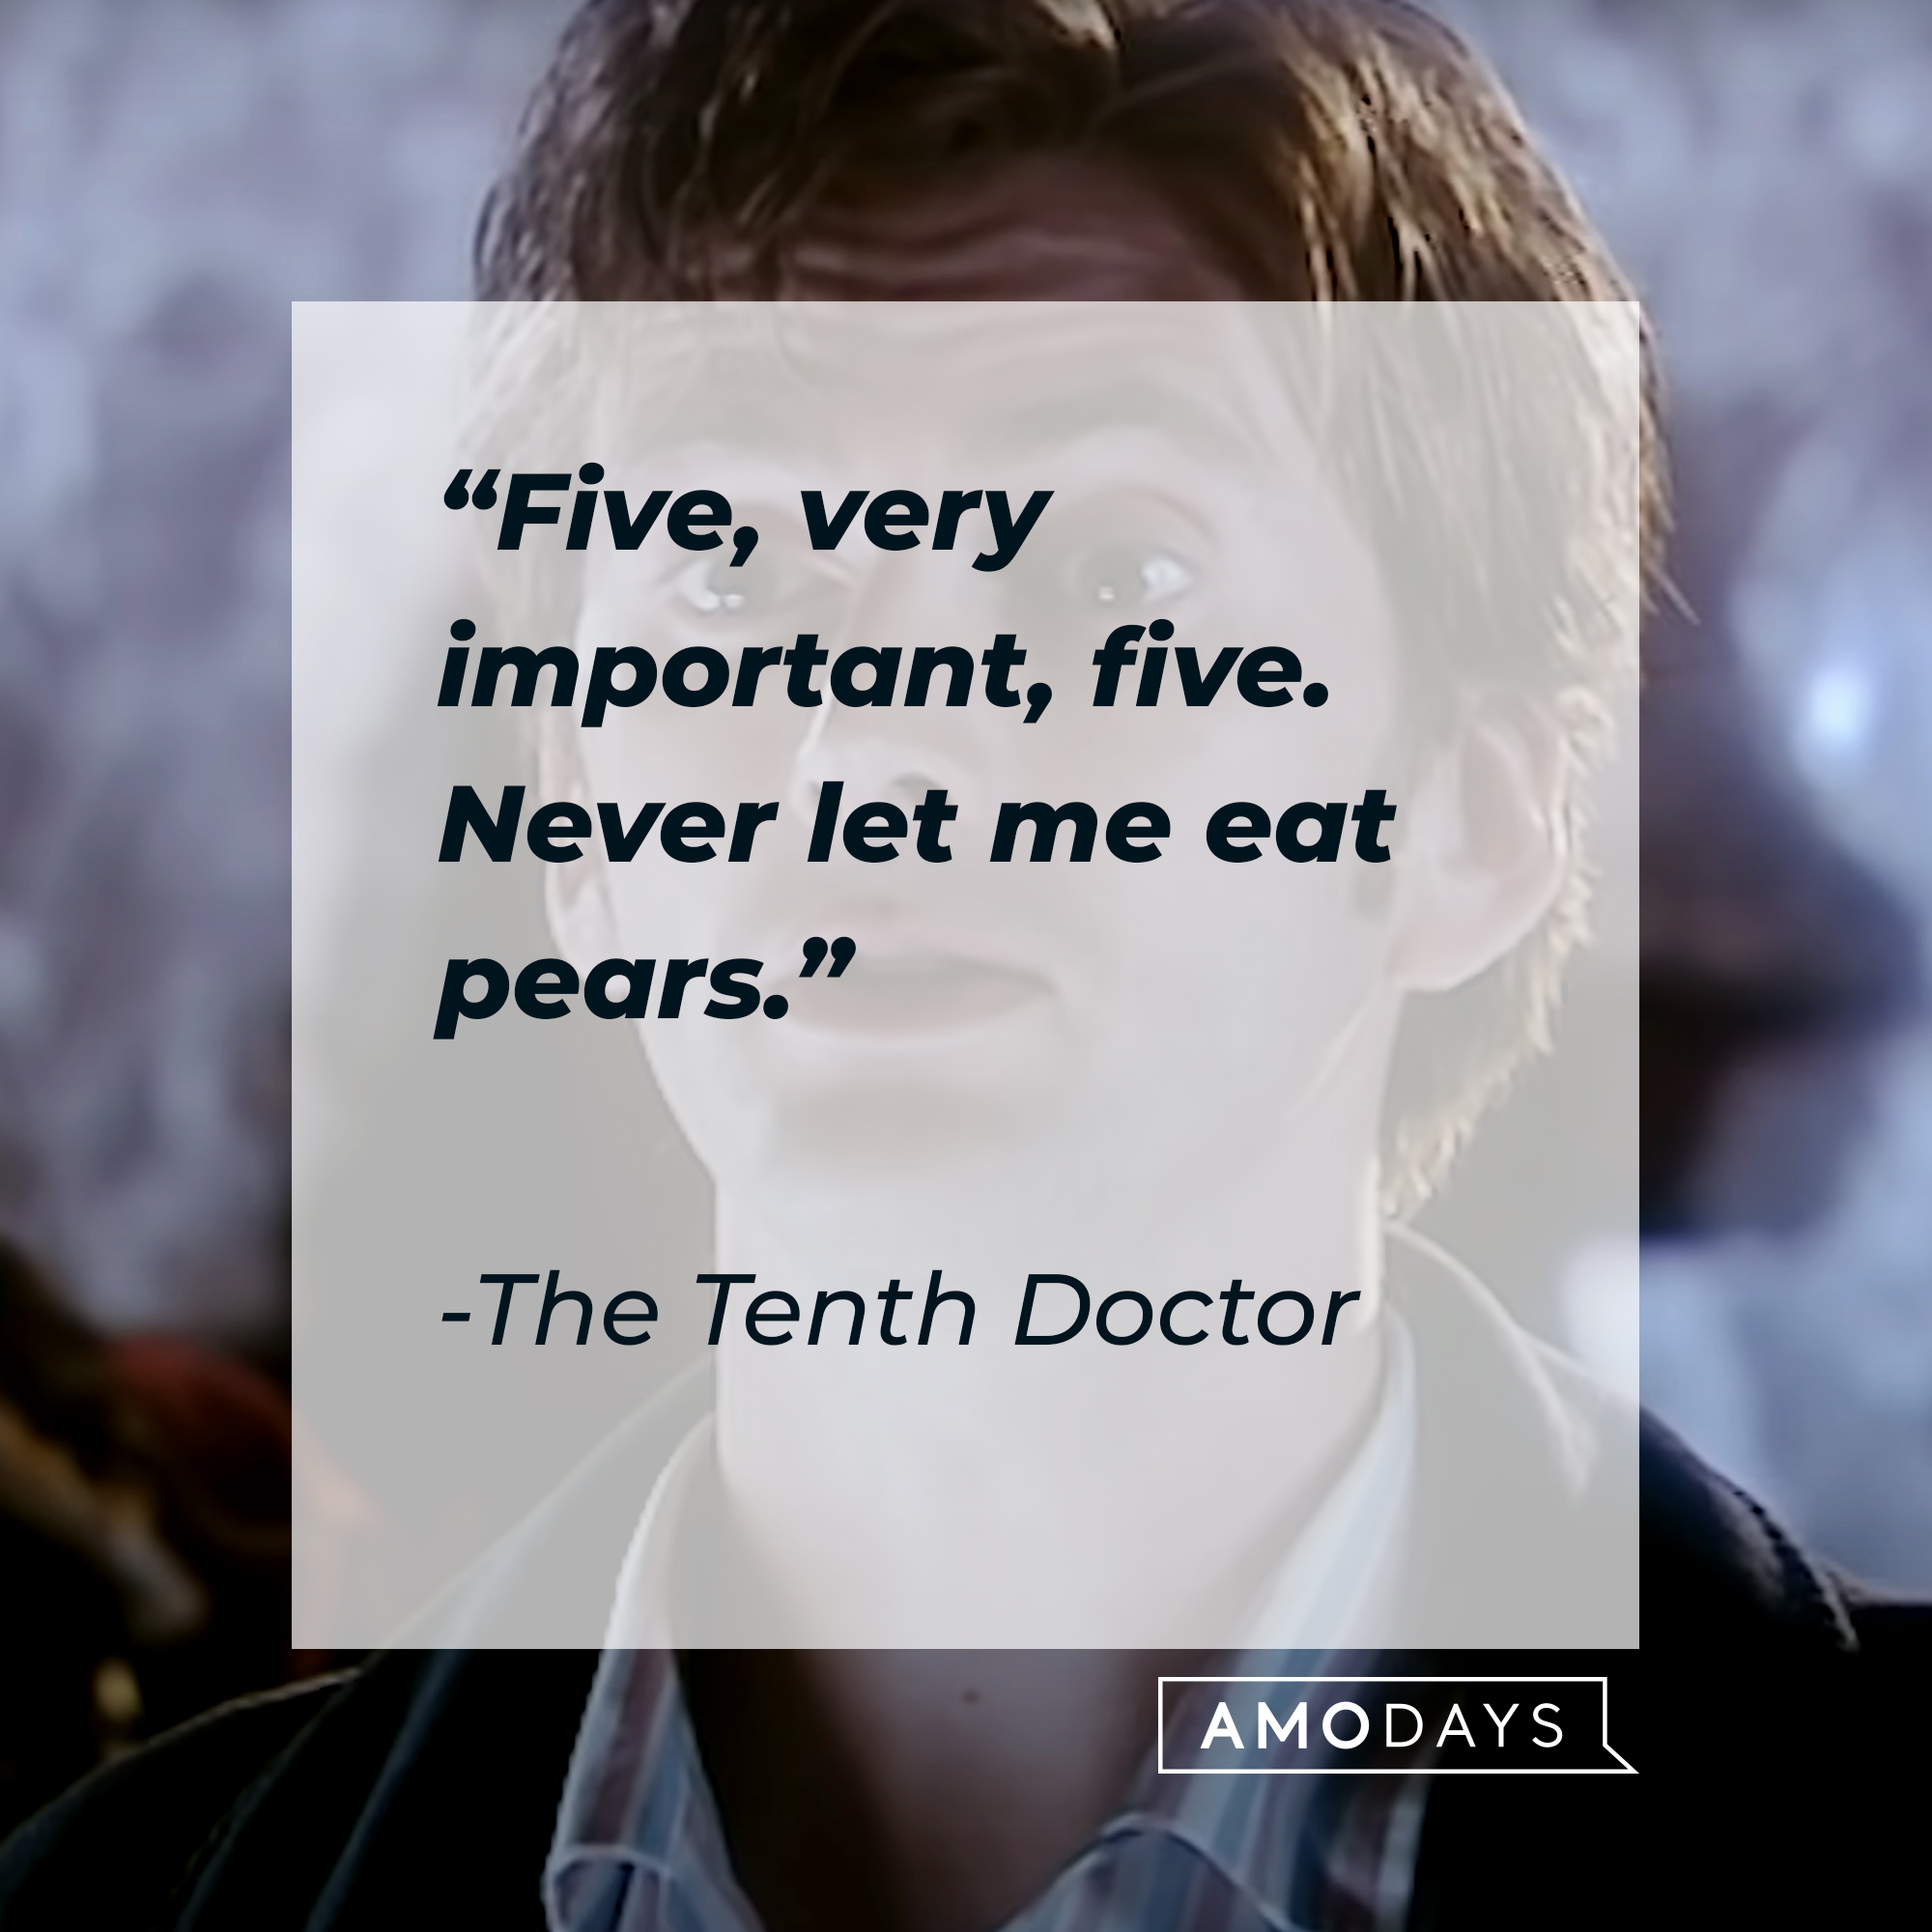 The Tenth Doctor's quote: "Five, very important, five. Never let me eat pears."  | Source: youtube.com/DoctorWho